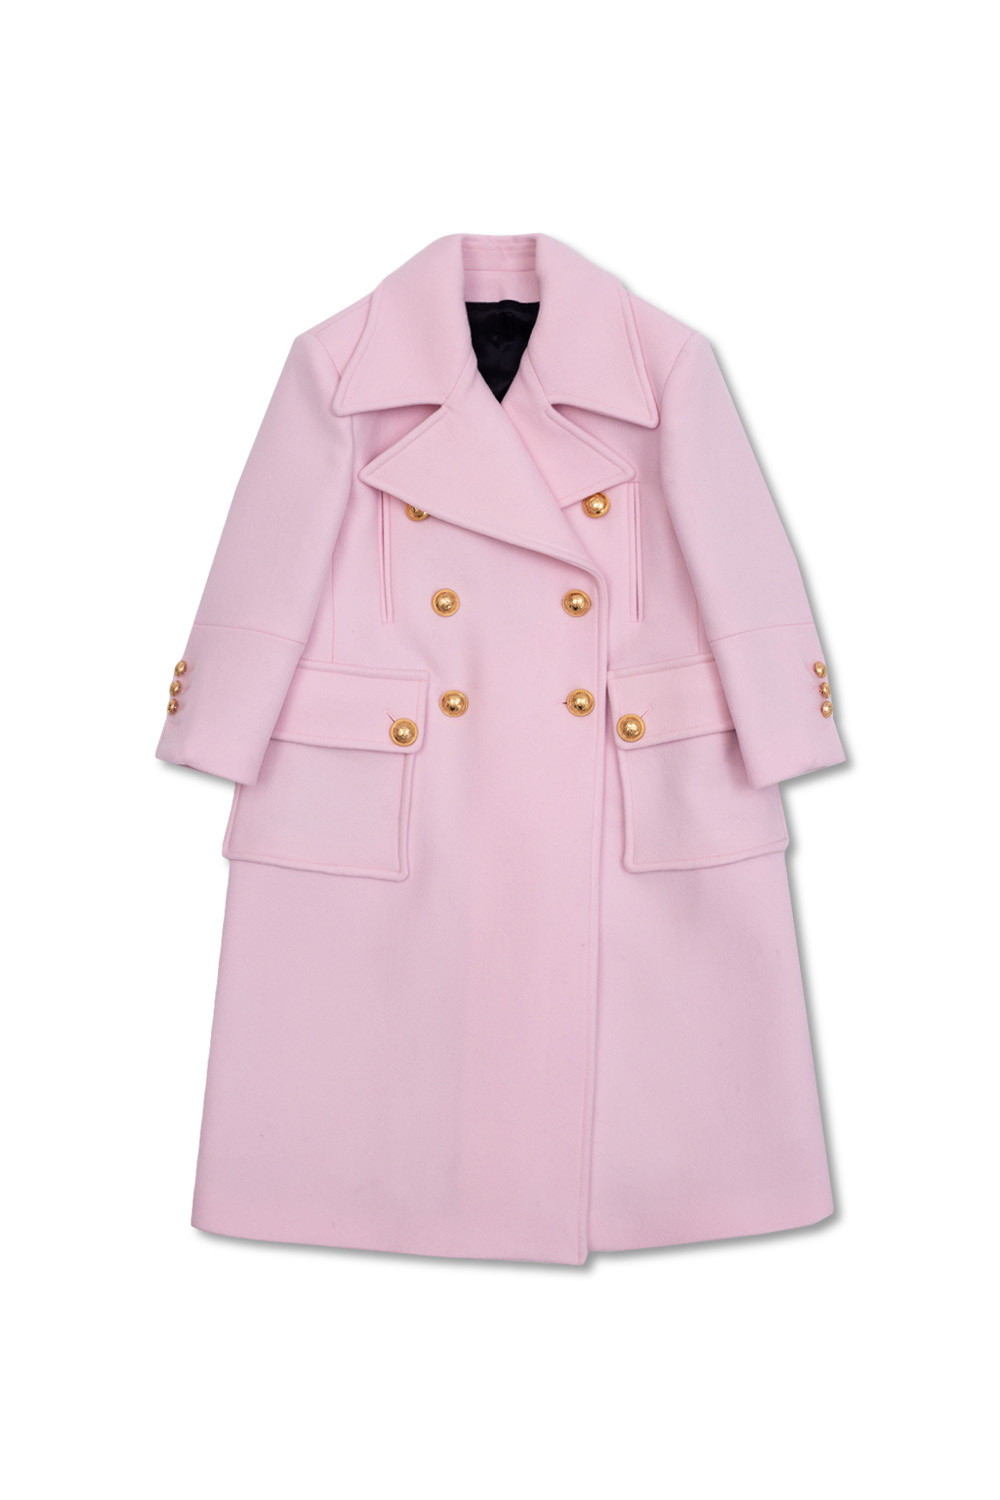 Balmain Kids Wool double-breasted coat | Kids's Girls clothes (4 